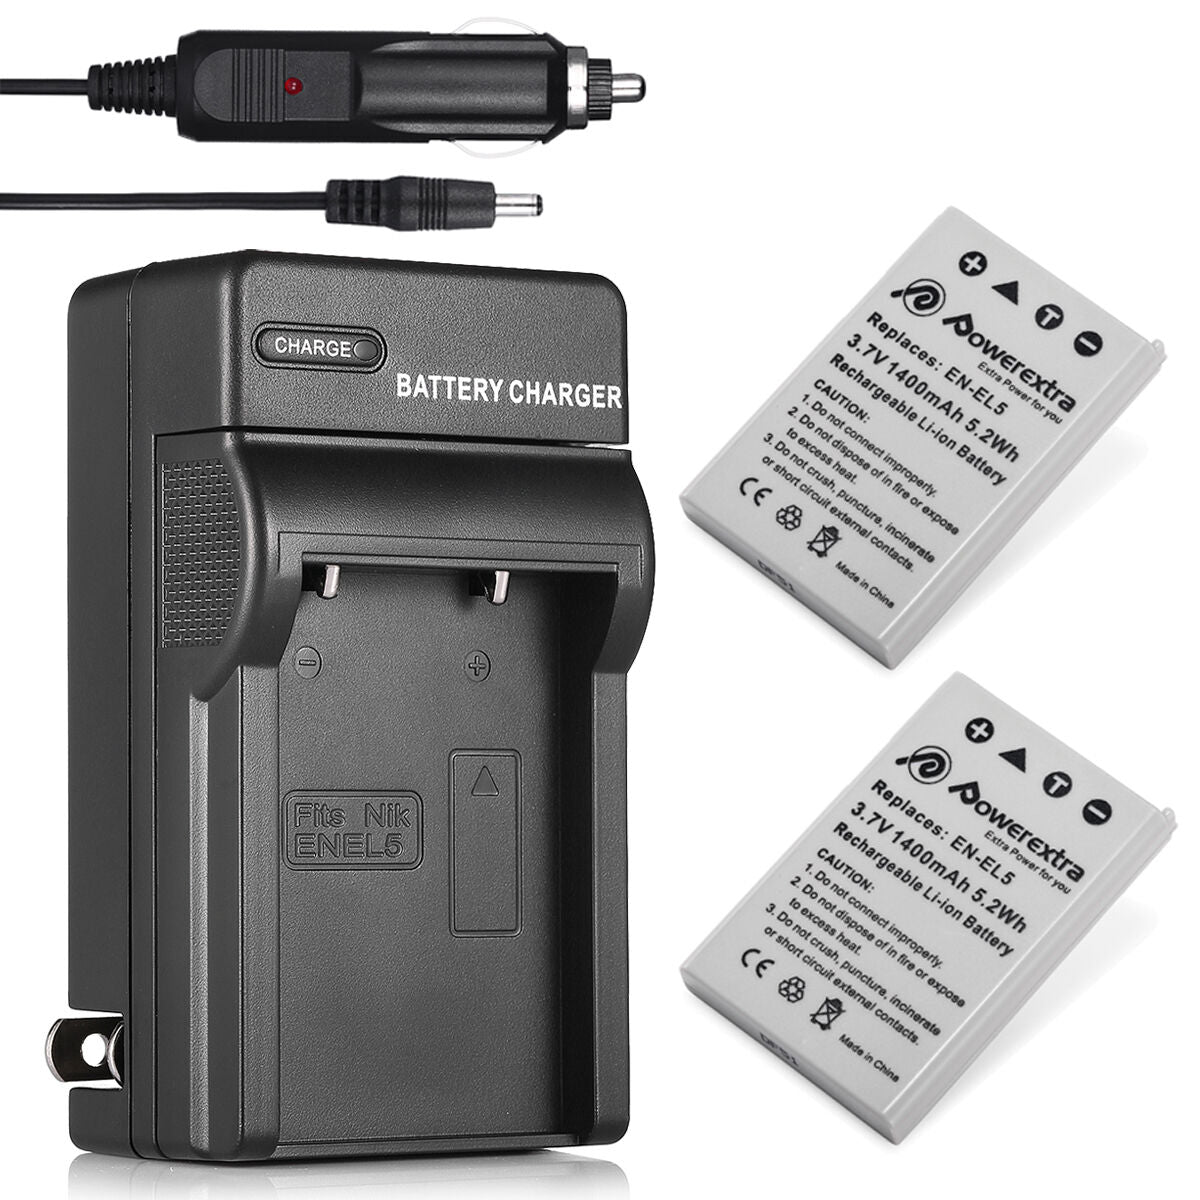 Nikon EN-EL5 Replacement Battery and Charger